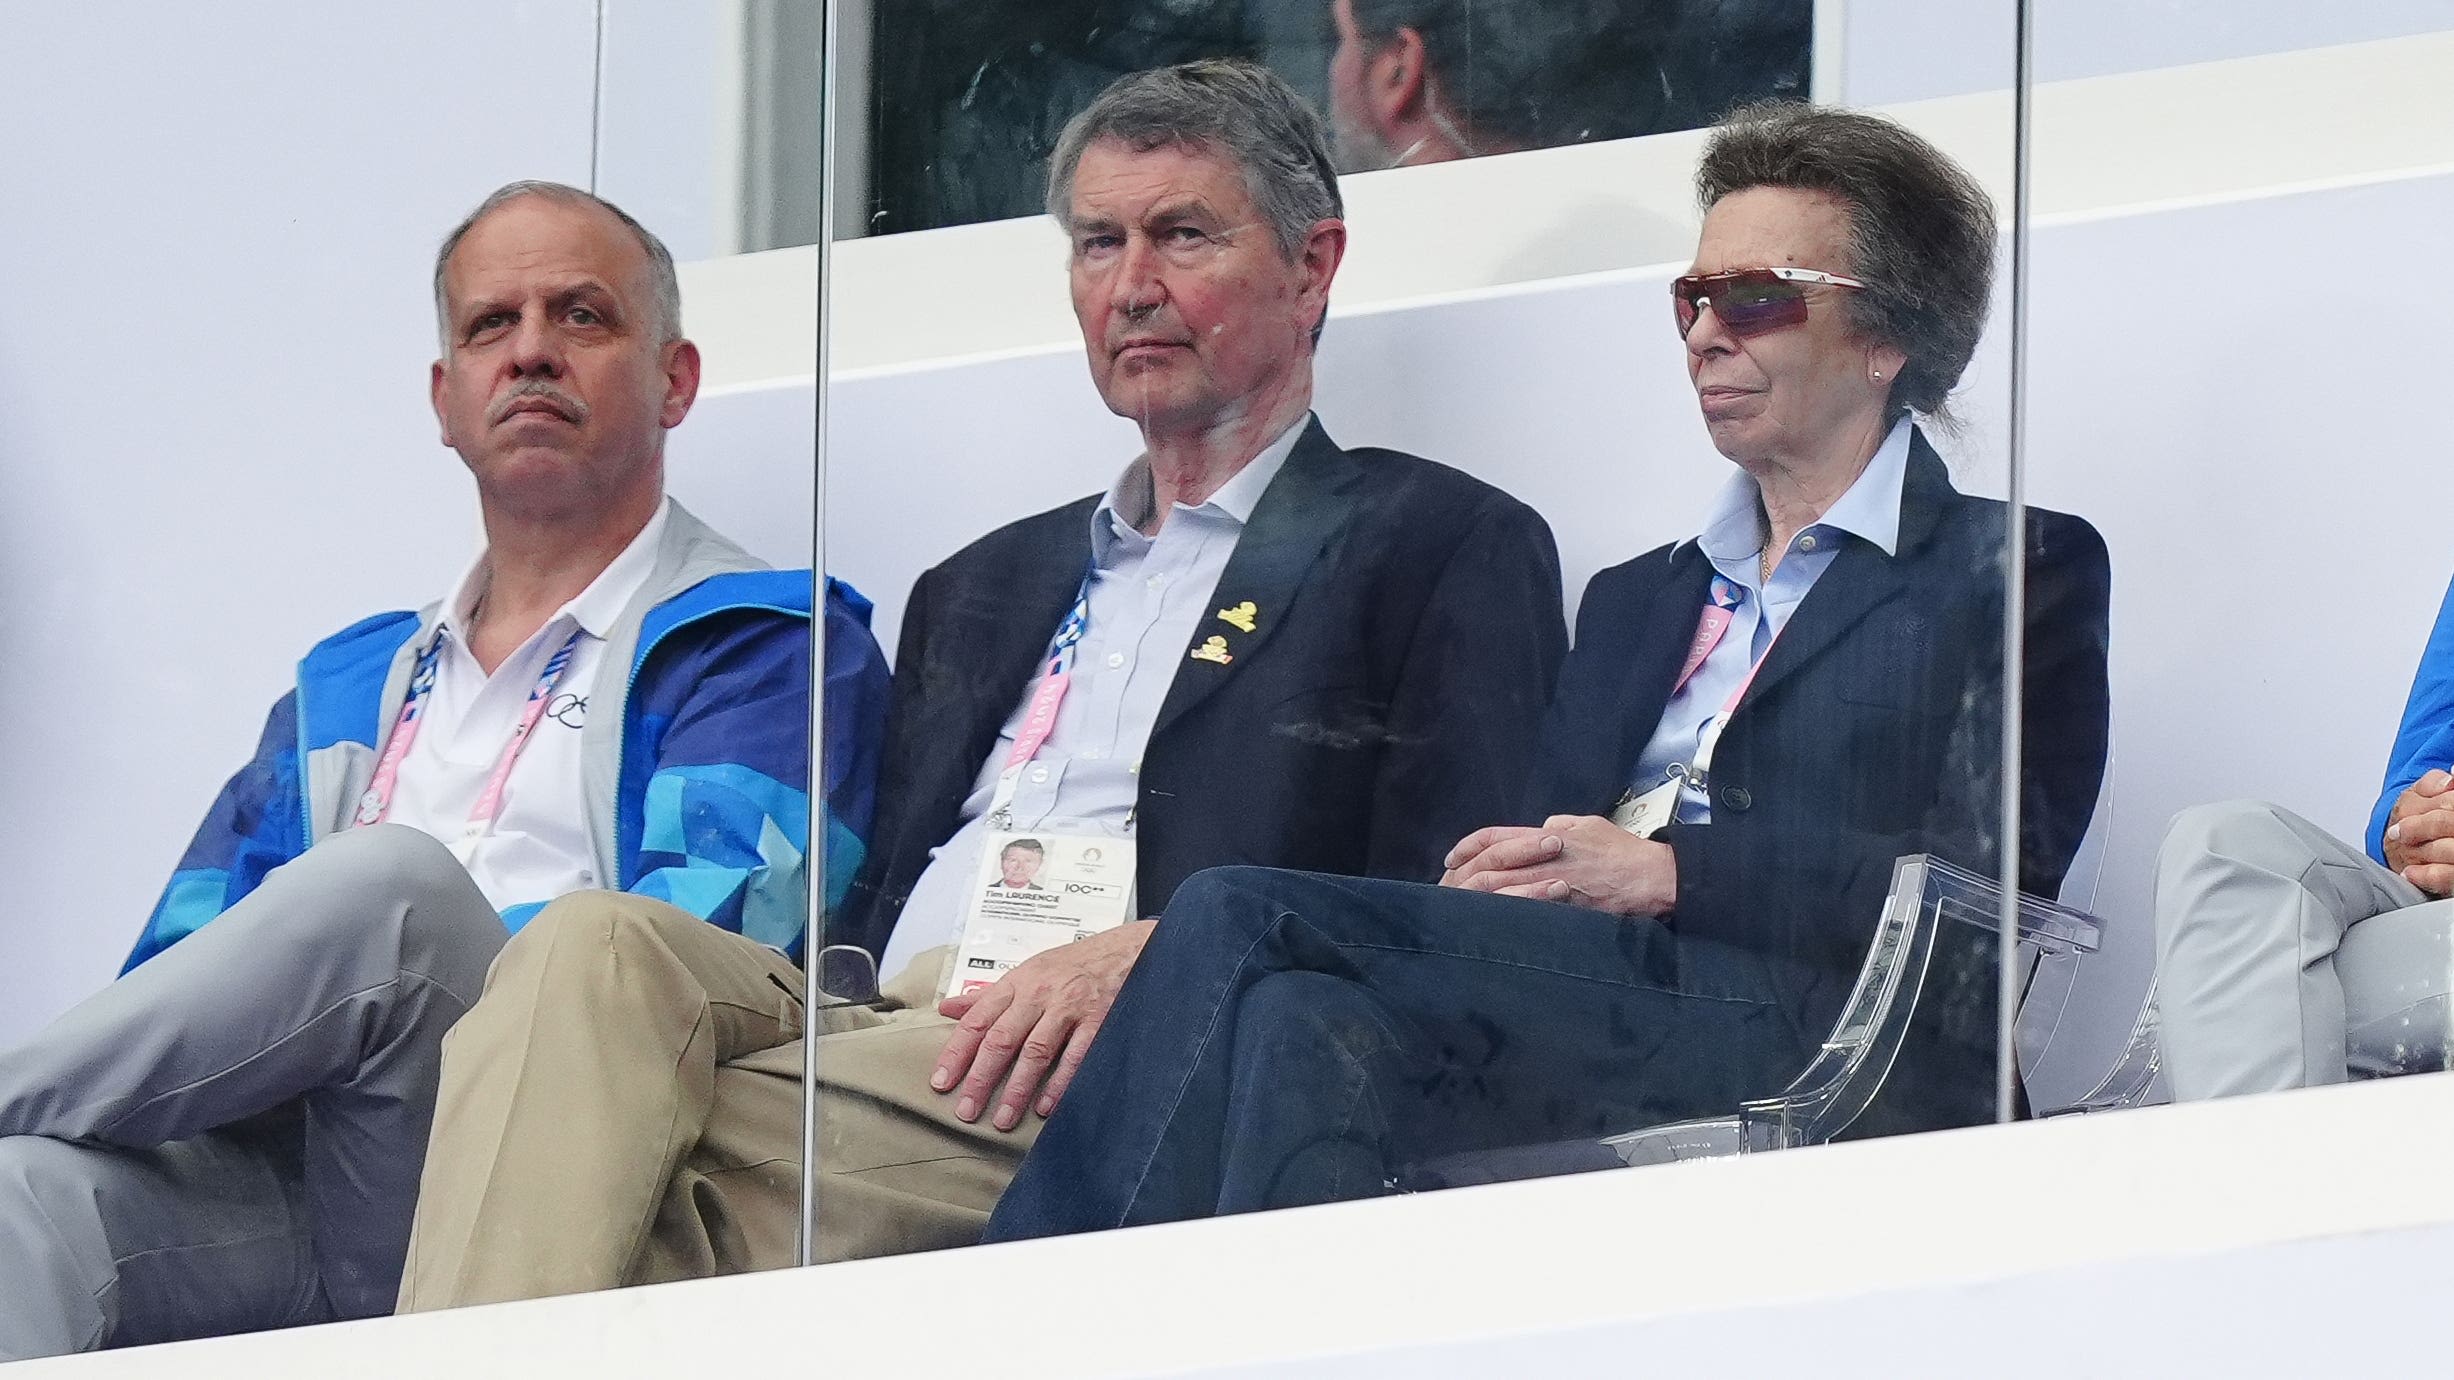 Princess Royal watches rugby at Olympics on day one of Games